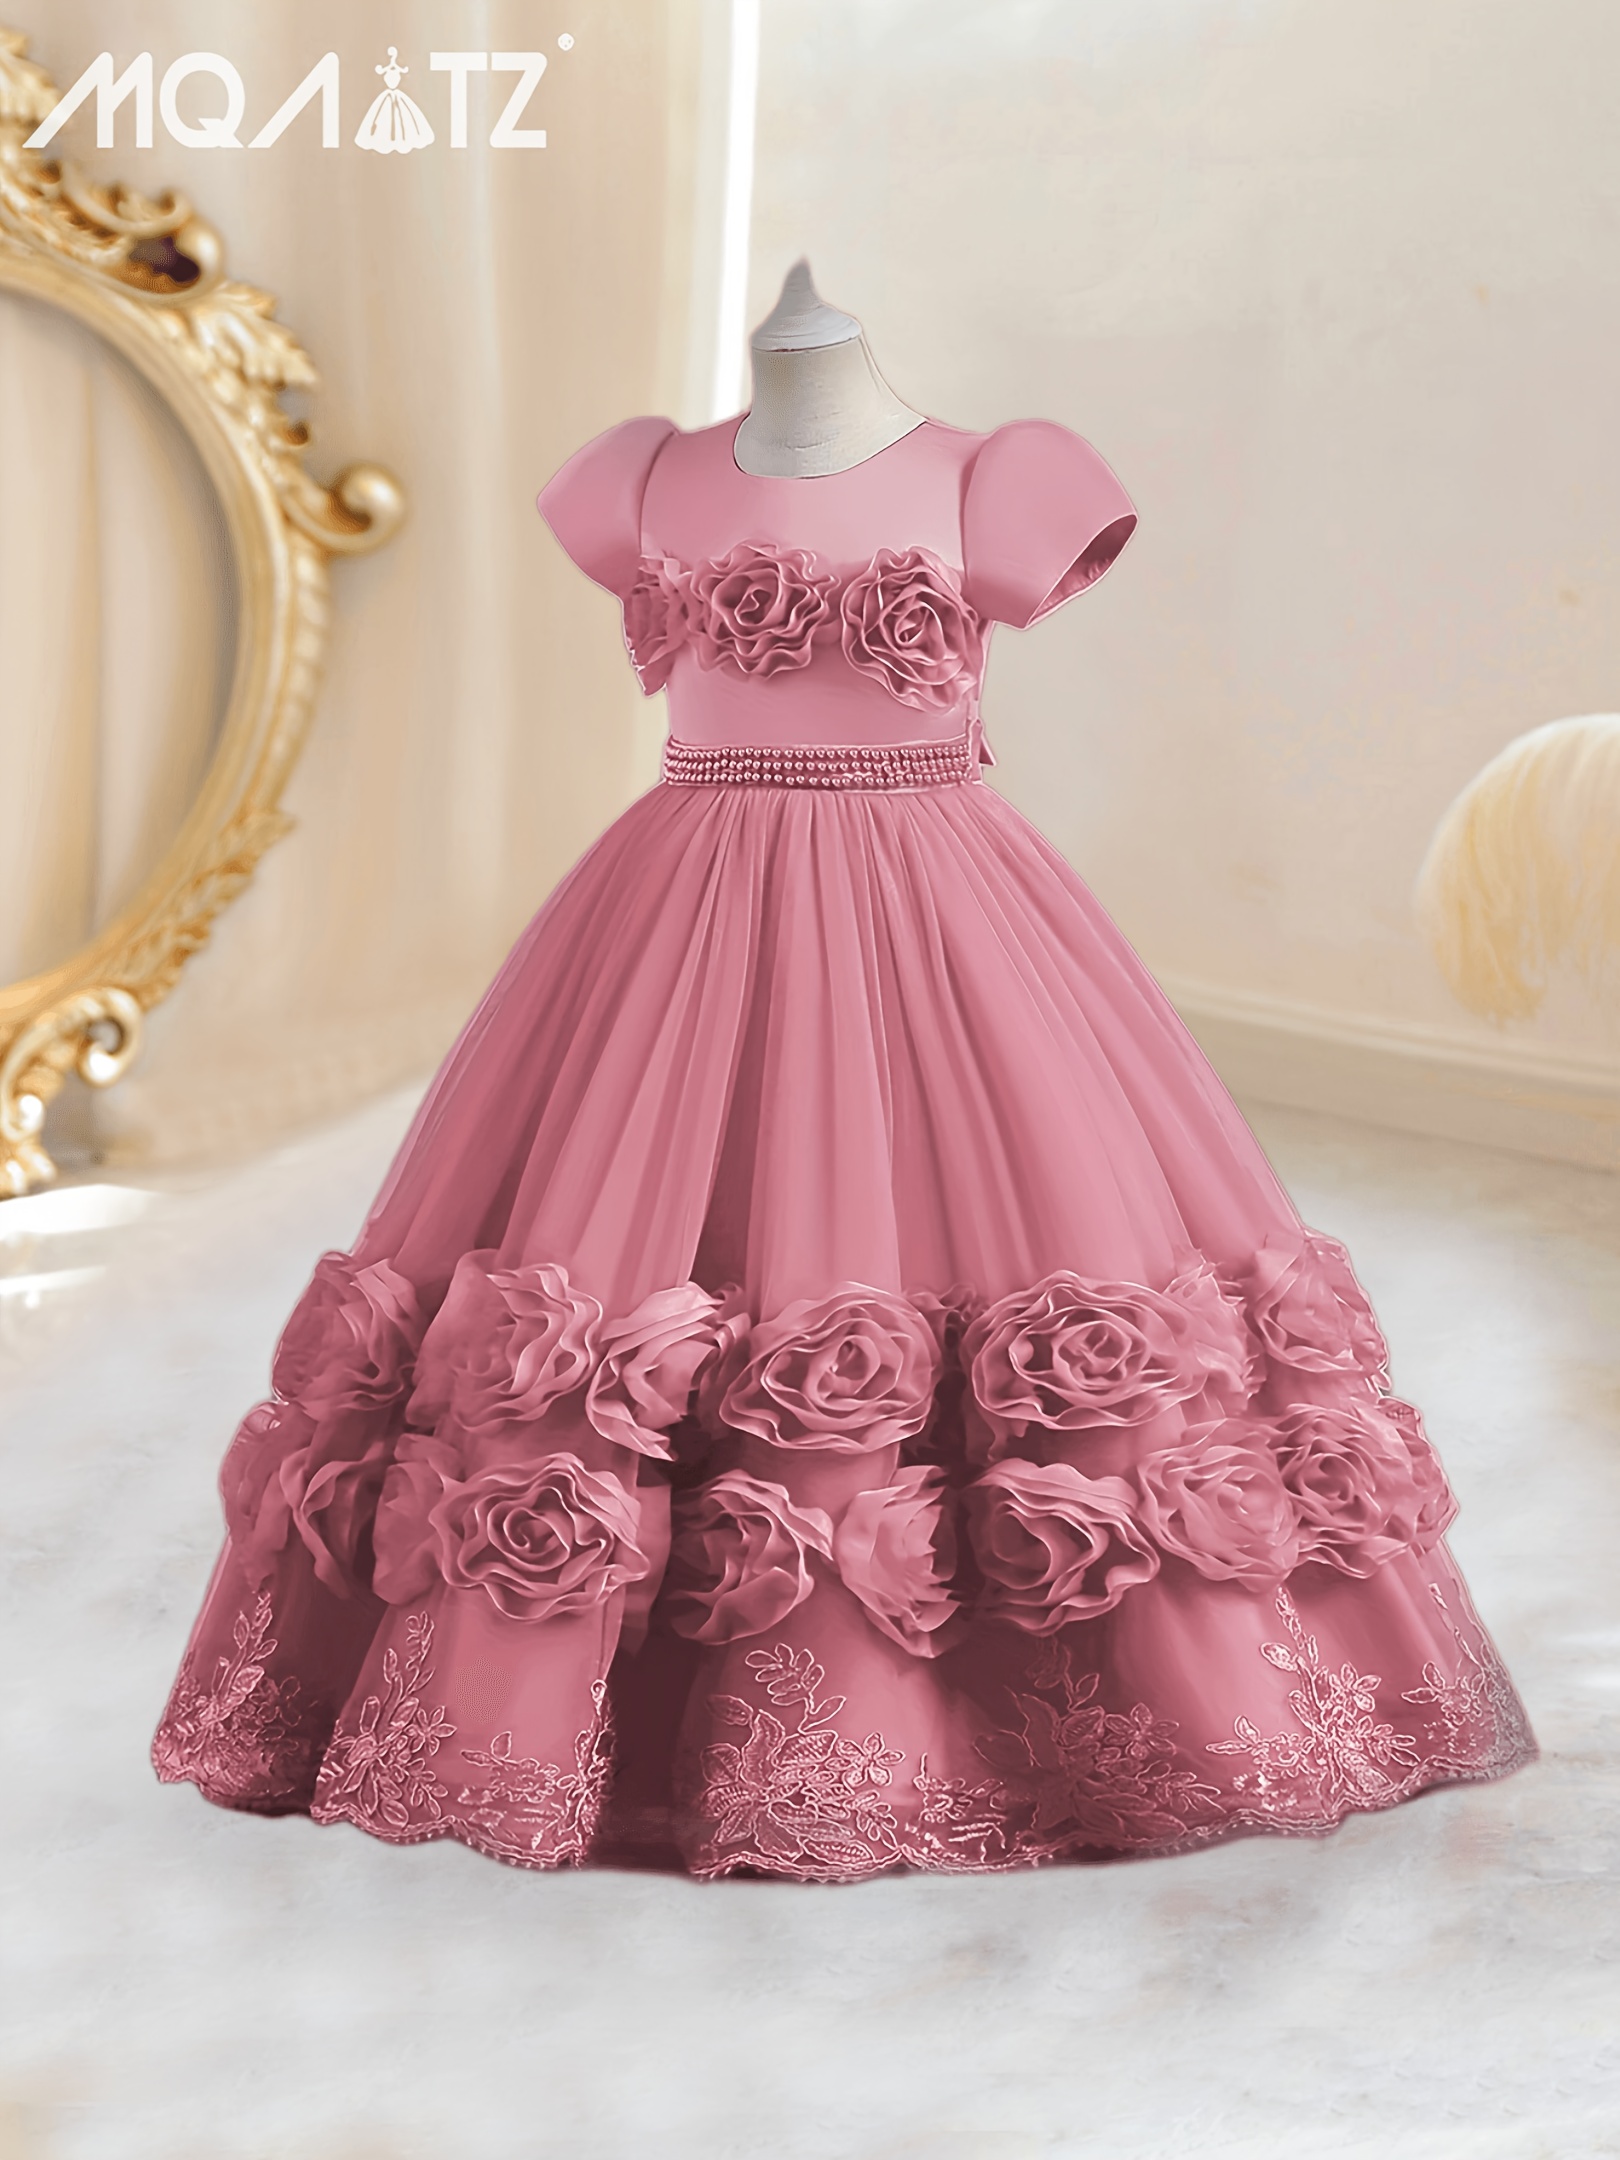 Beaded Sequins embroidery Kids Dresses For Bridesmaid Wedding Dress  Children Pageant Gown Girls Party PrincessTulle Baby dress